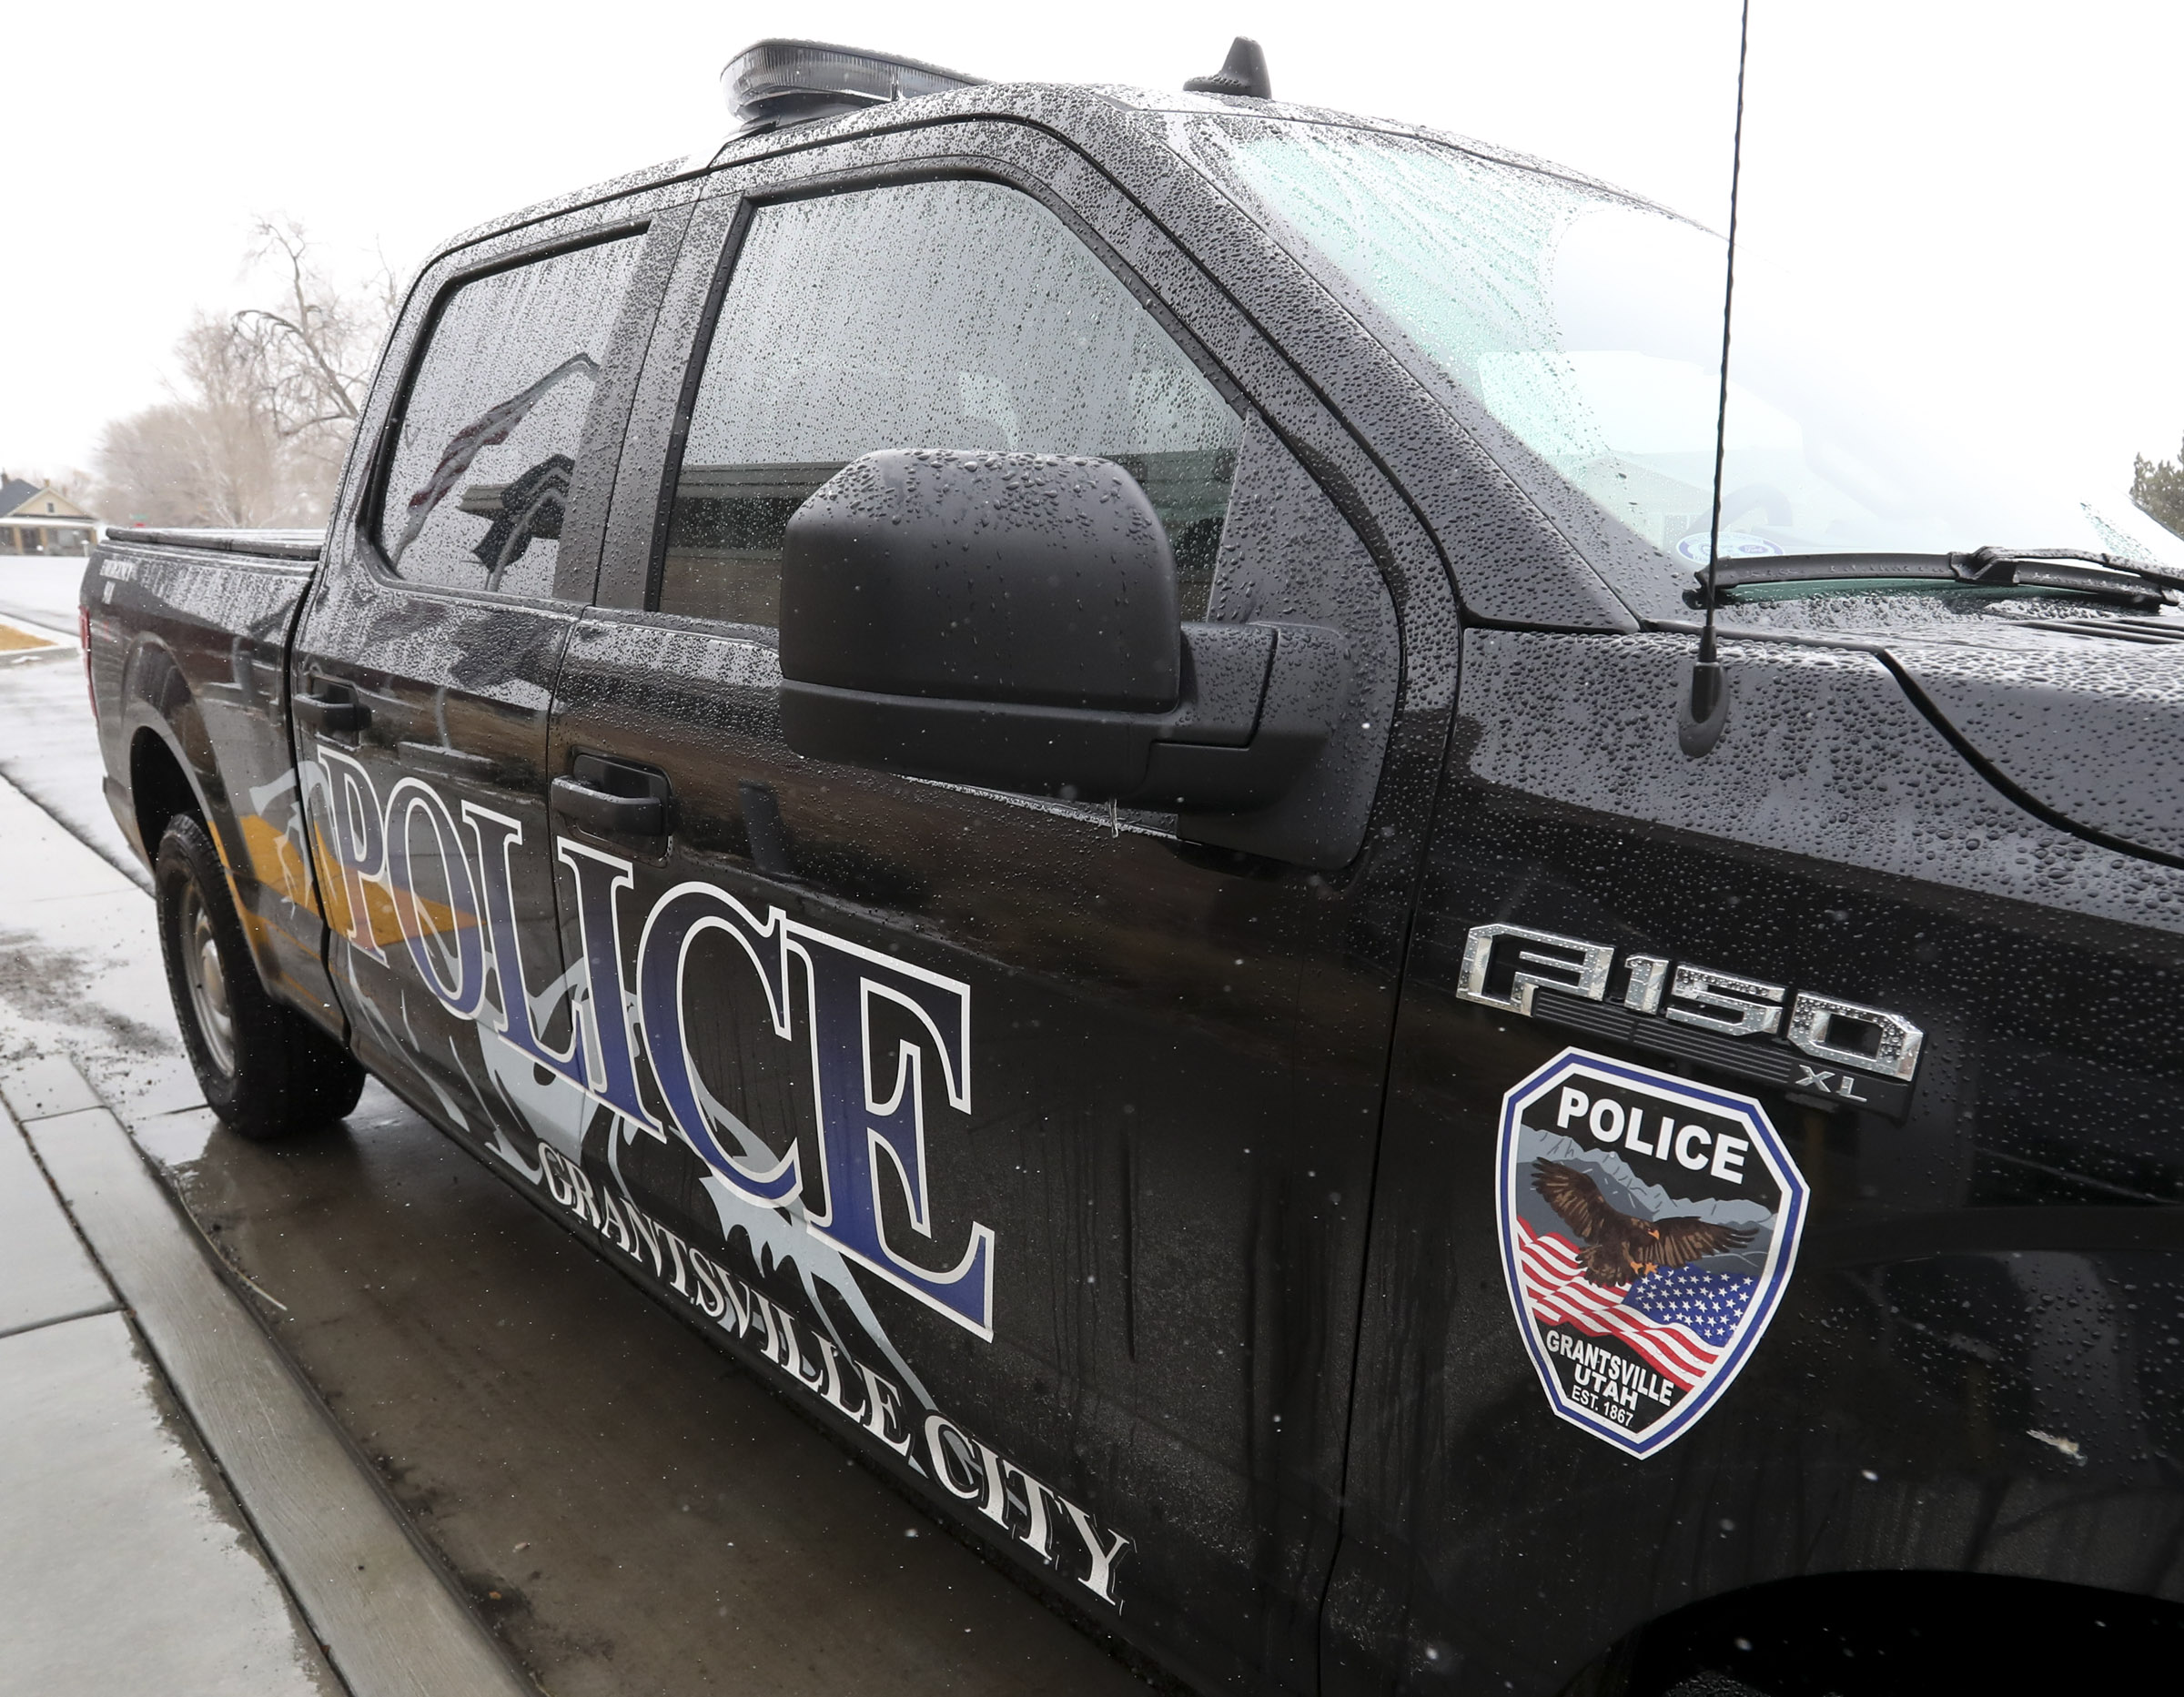 FILE: A Grantsville police vehicle is pictured in Grantsville on Monday, Dec. 28, 2020....